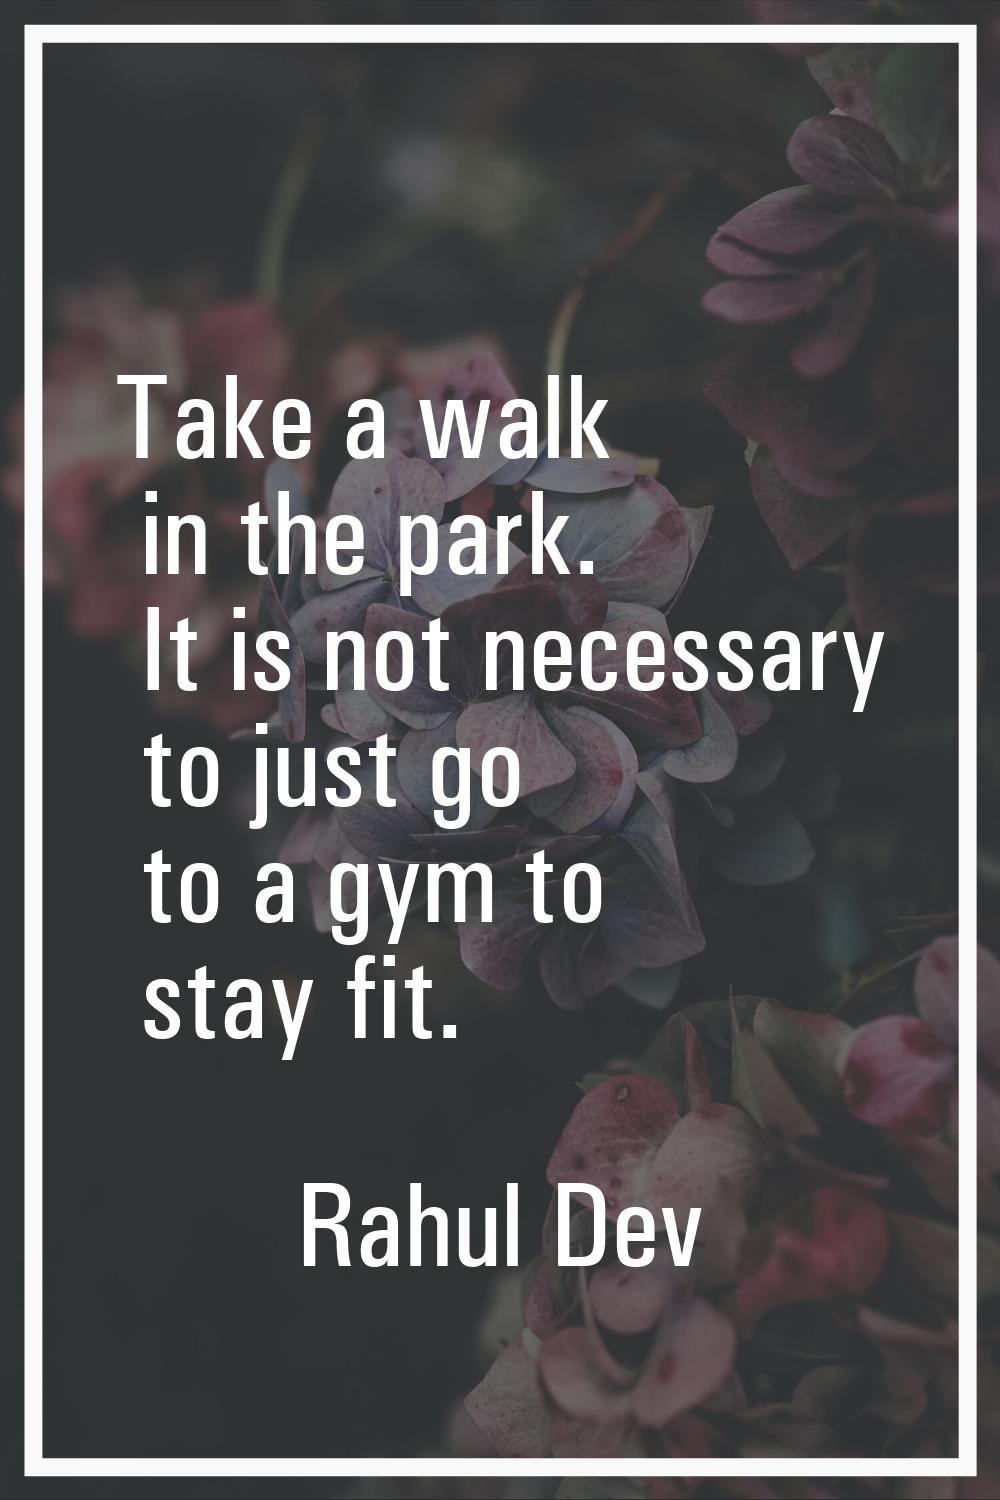 Take a walk in the park. It is not necessary to just go to a gym to stay fit.